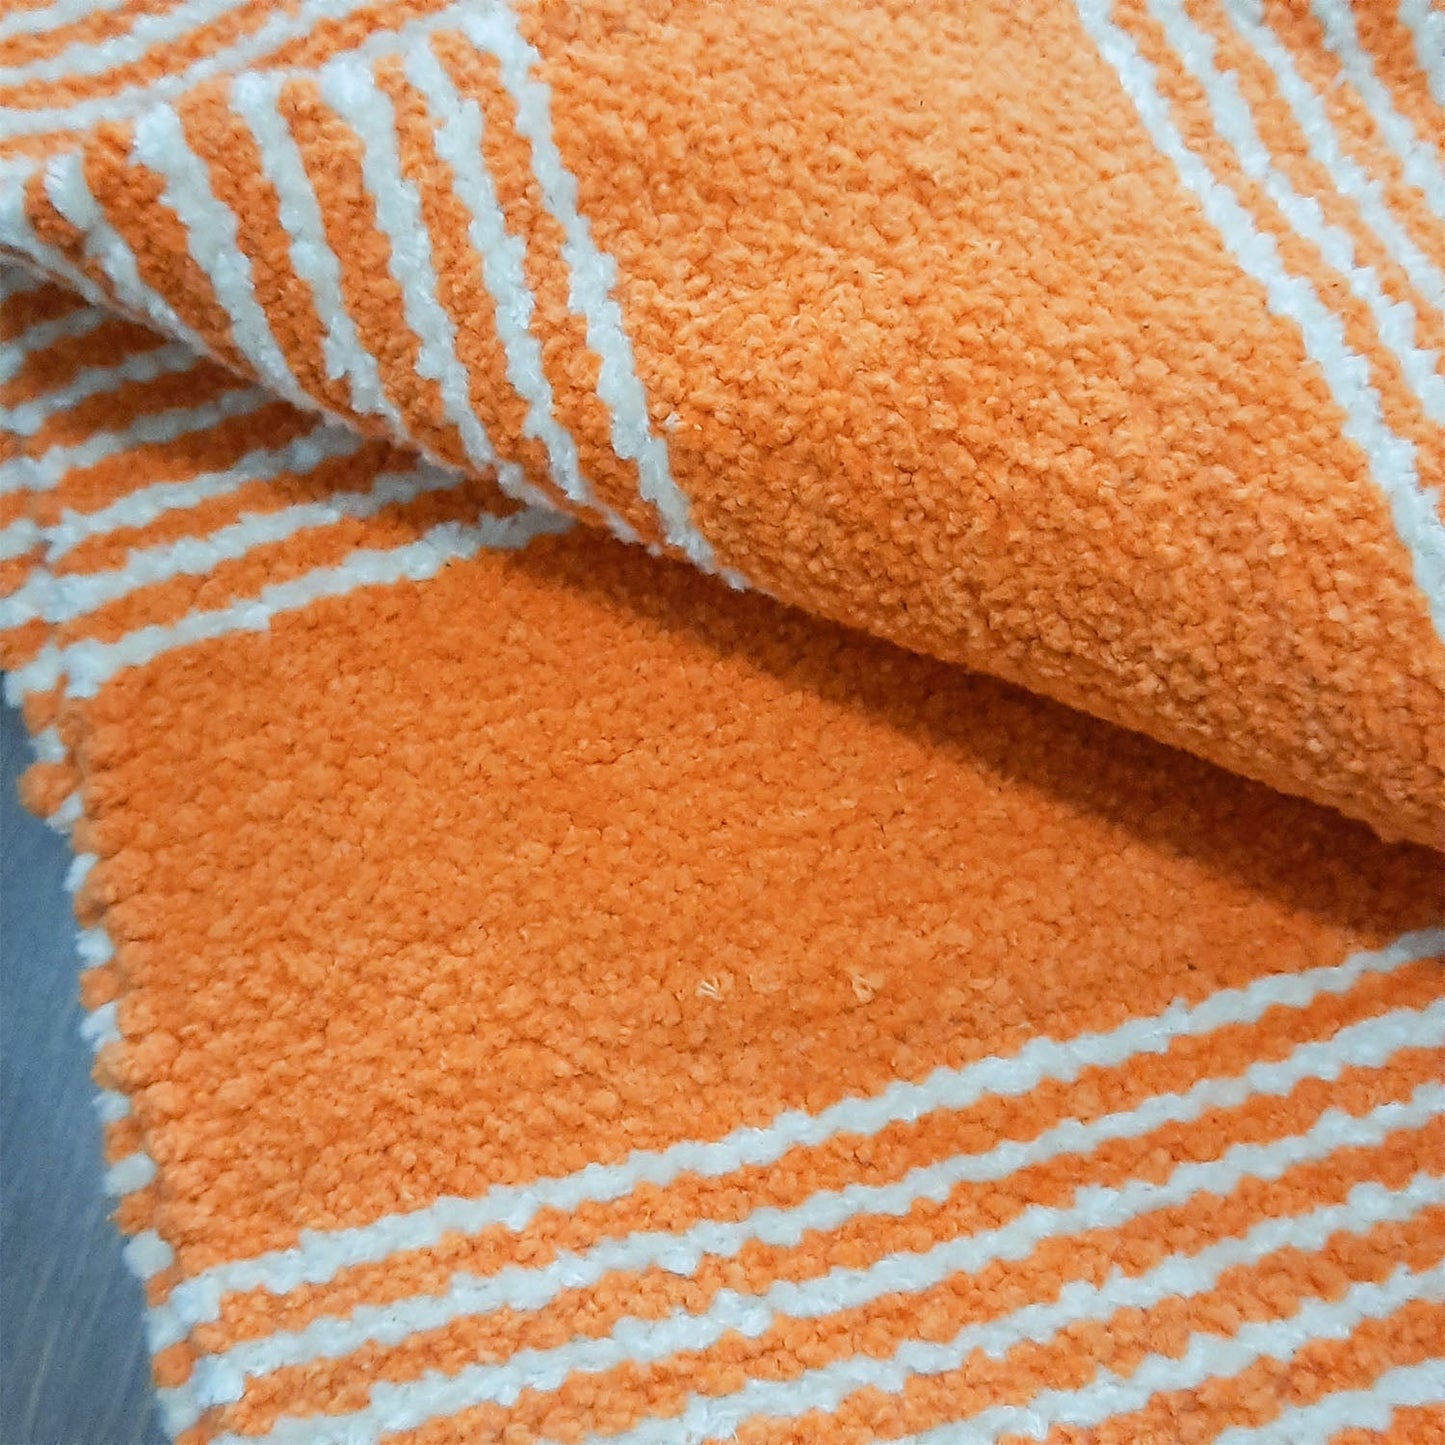 Clearance Sale-Avioni Handloom Luxe Cotton Durries in White and Orange Stripes- 90cm x 150cm (~3×5 Feet)